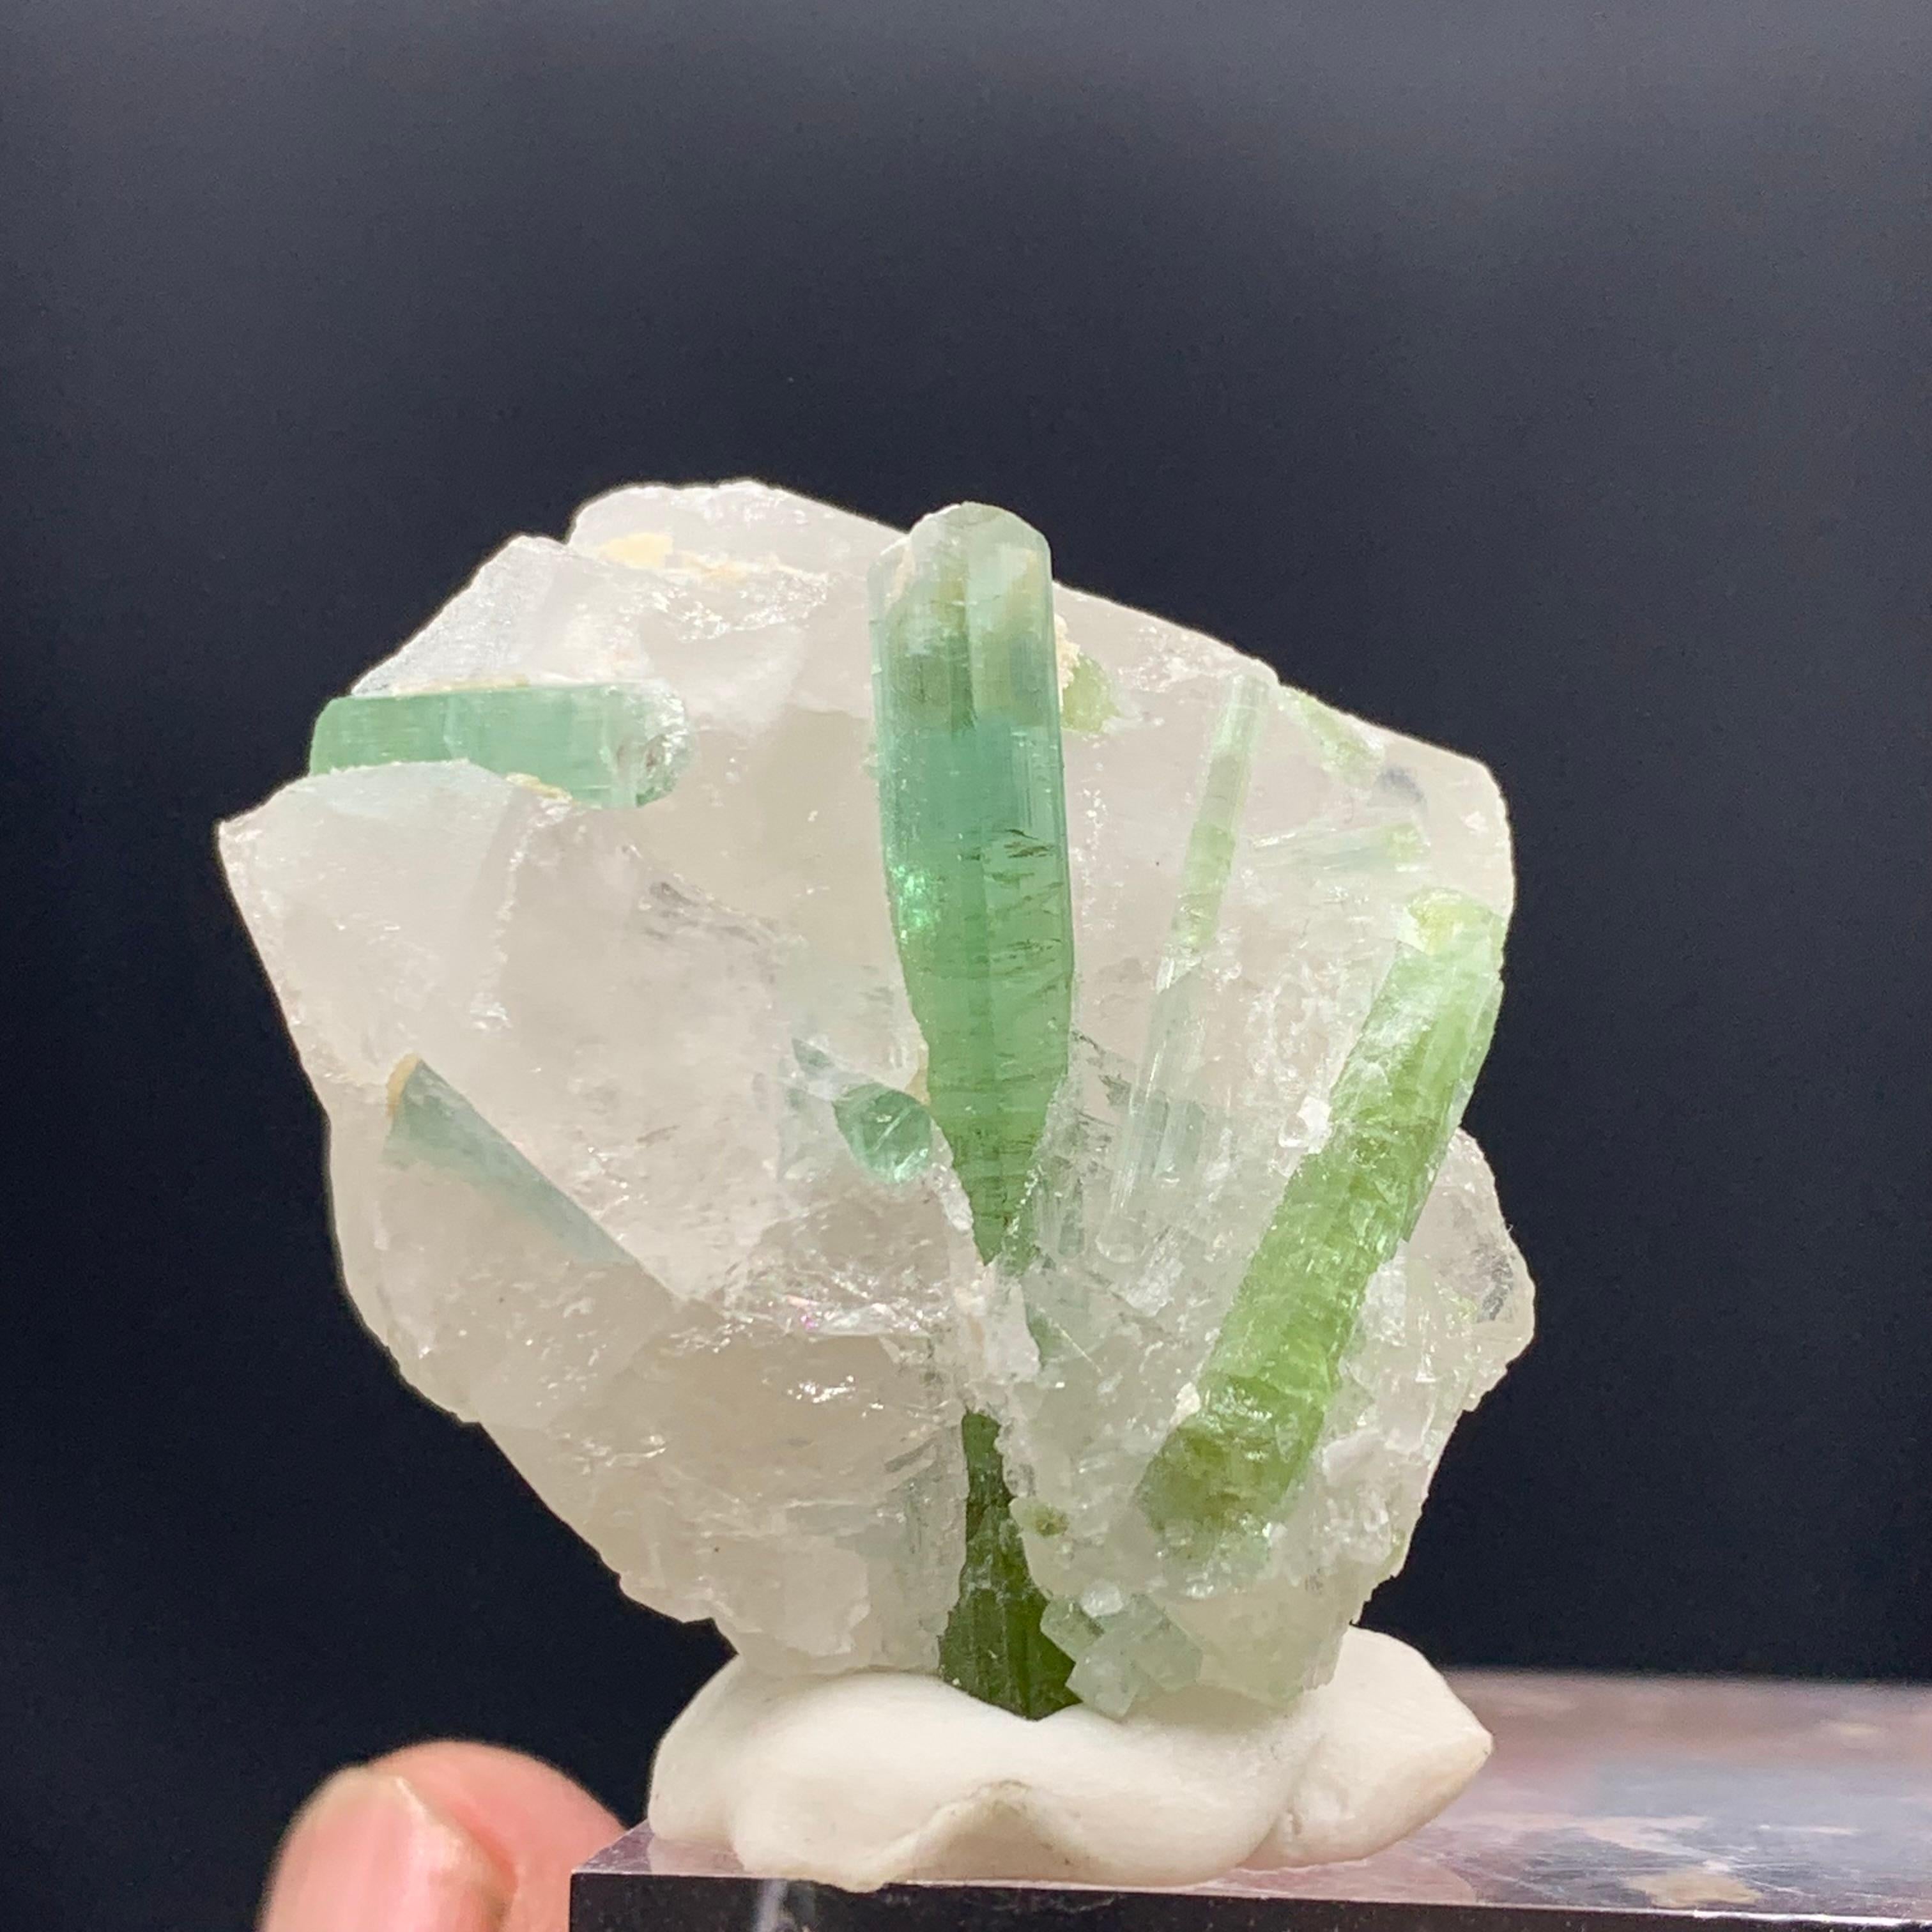 18.49 Gram Beautiful Tourmaline Crystals Attached With Quartz From Afghanistan 

Weight: 18.49 Gram 
Dimension: 2.9 x 3 x 2 Cm
Origin: Afghanistan 

Tourmaline is a crystalline silicate mineral group in which boron is compounded with elements such